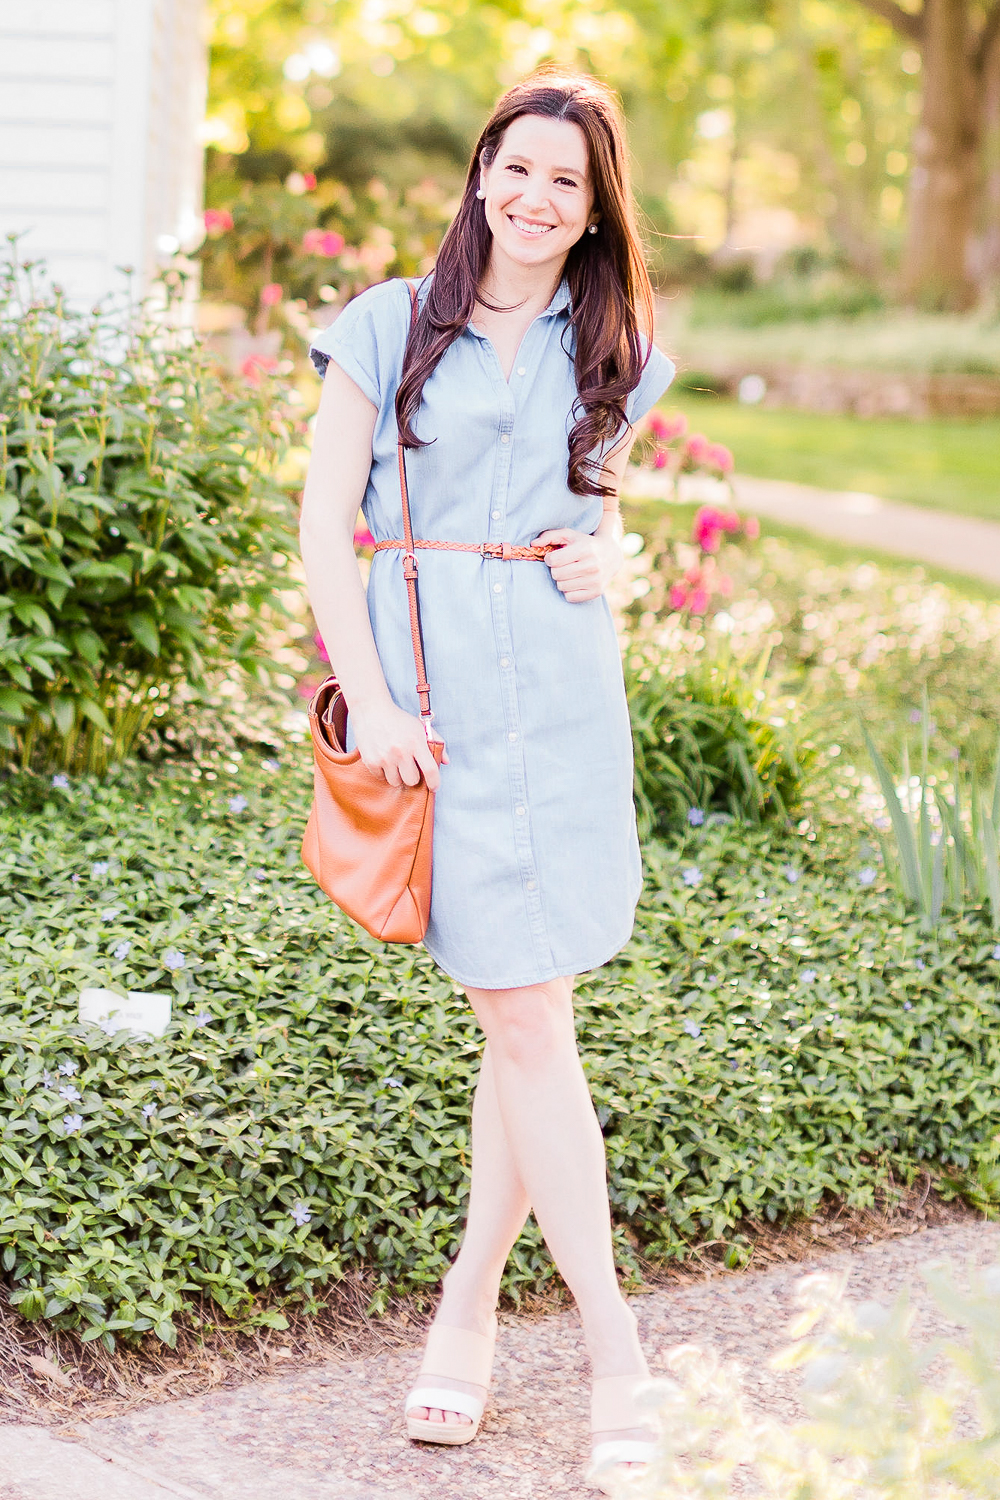 Old Navy chambray shirtdress outfit, 10 Preppy 4th of July Outfit Ideas for Women by popular affordable fashion blogger Stephanie Ziajka from Diary of a Debutante